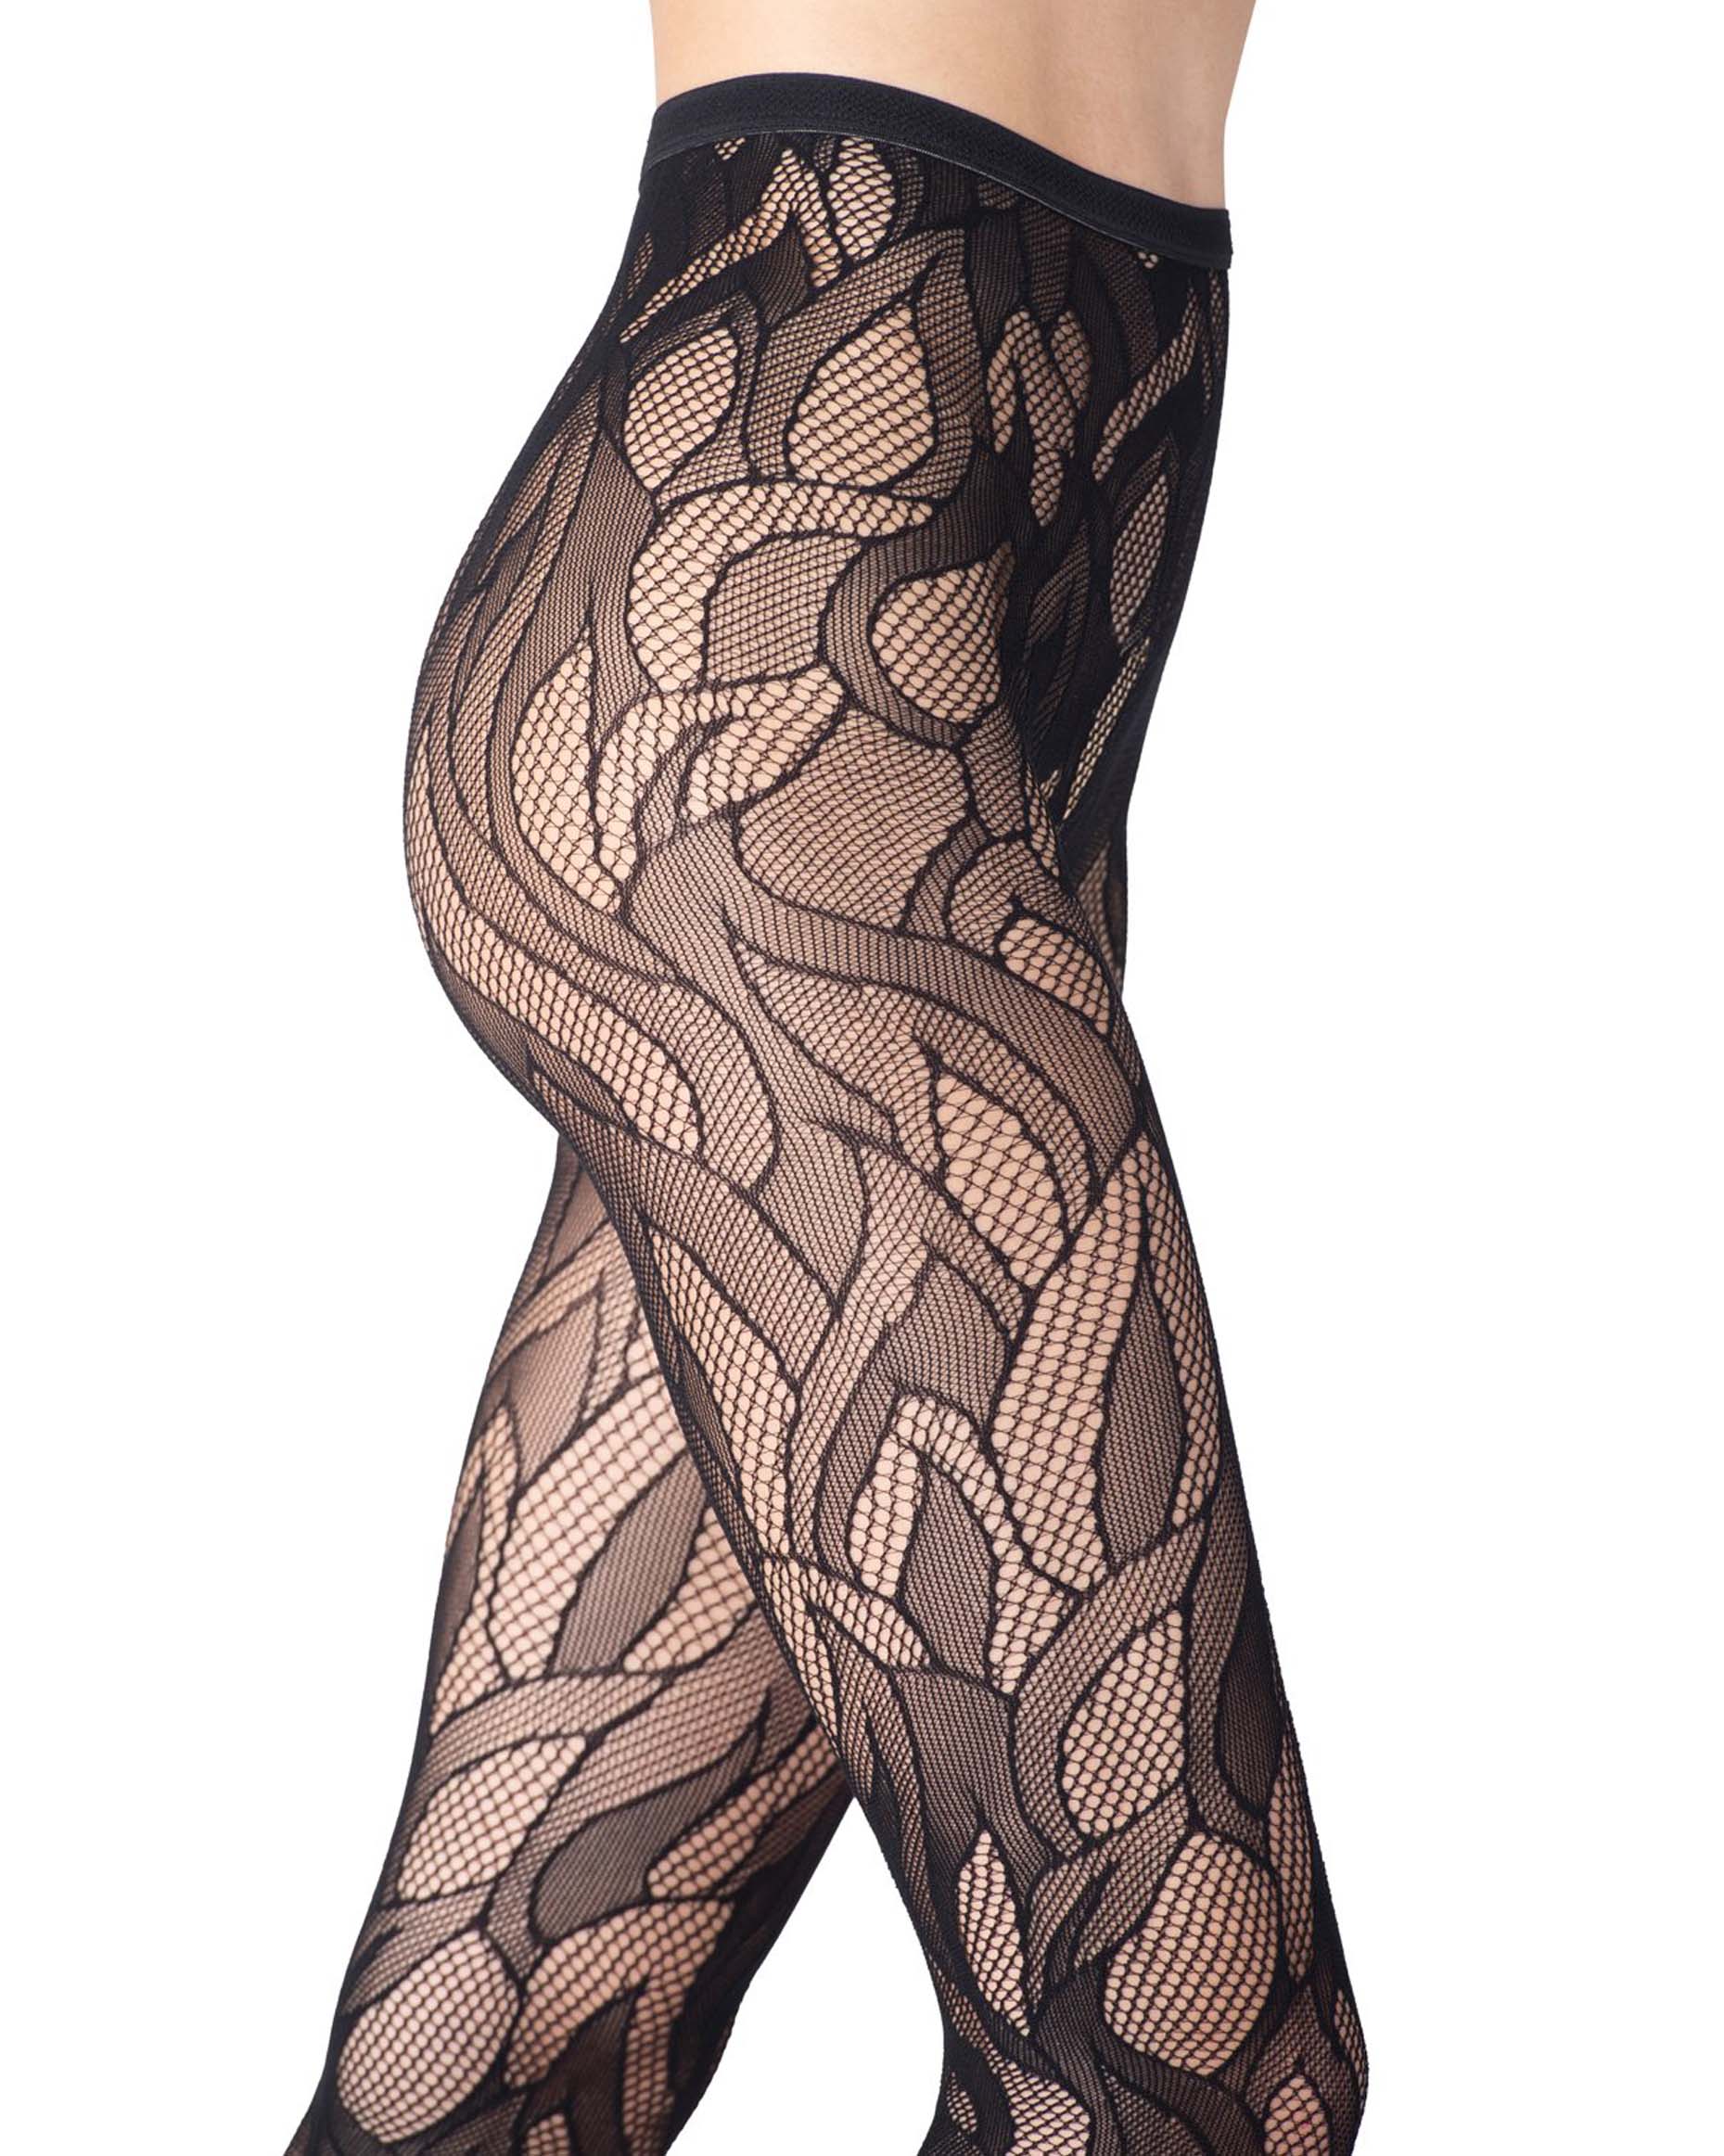 Emilio Cavallini Flames Tights - Black open fishnet tights with a stylised flame pattern and seamless body.